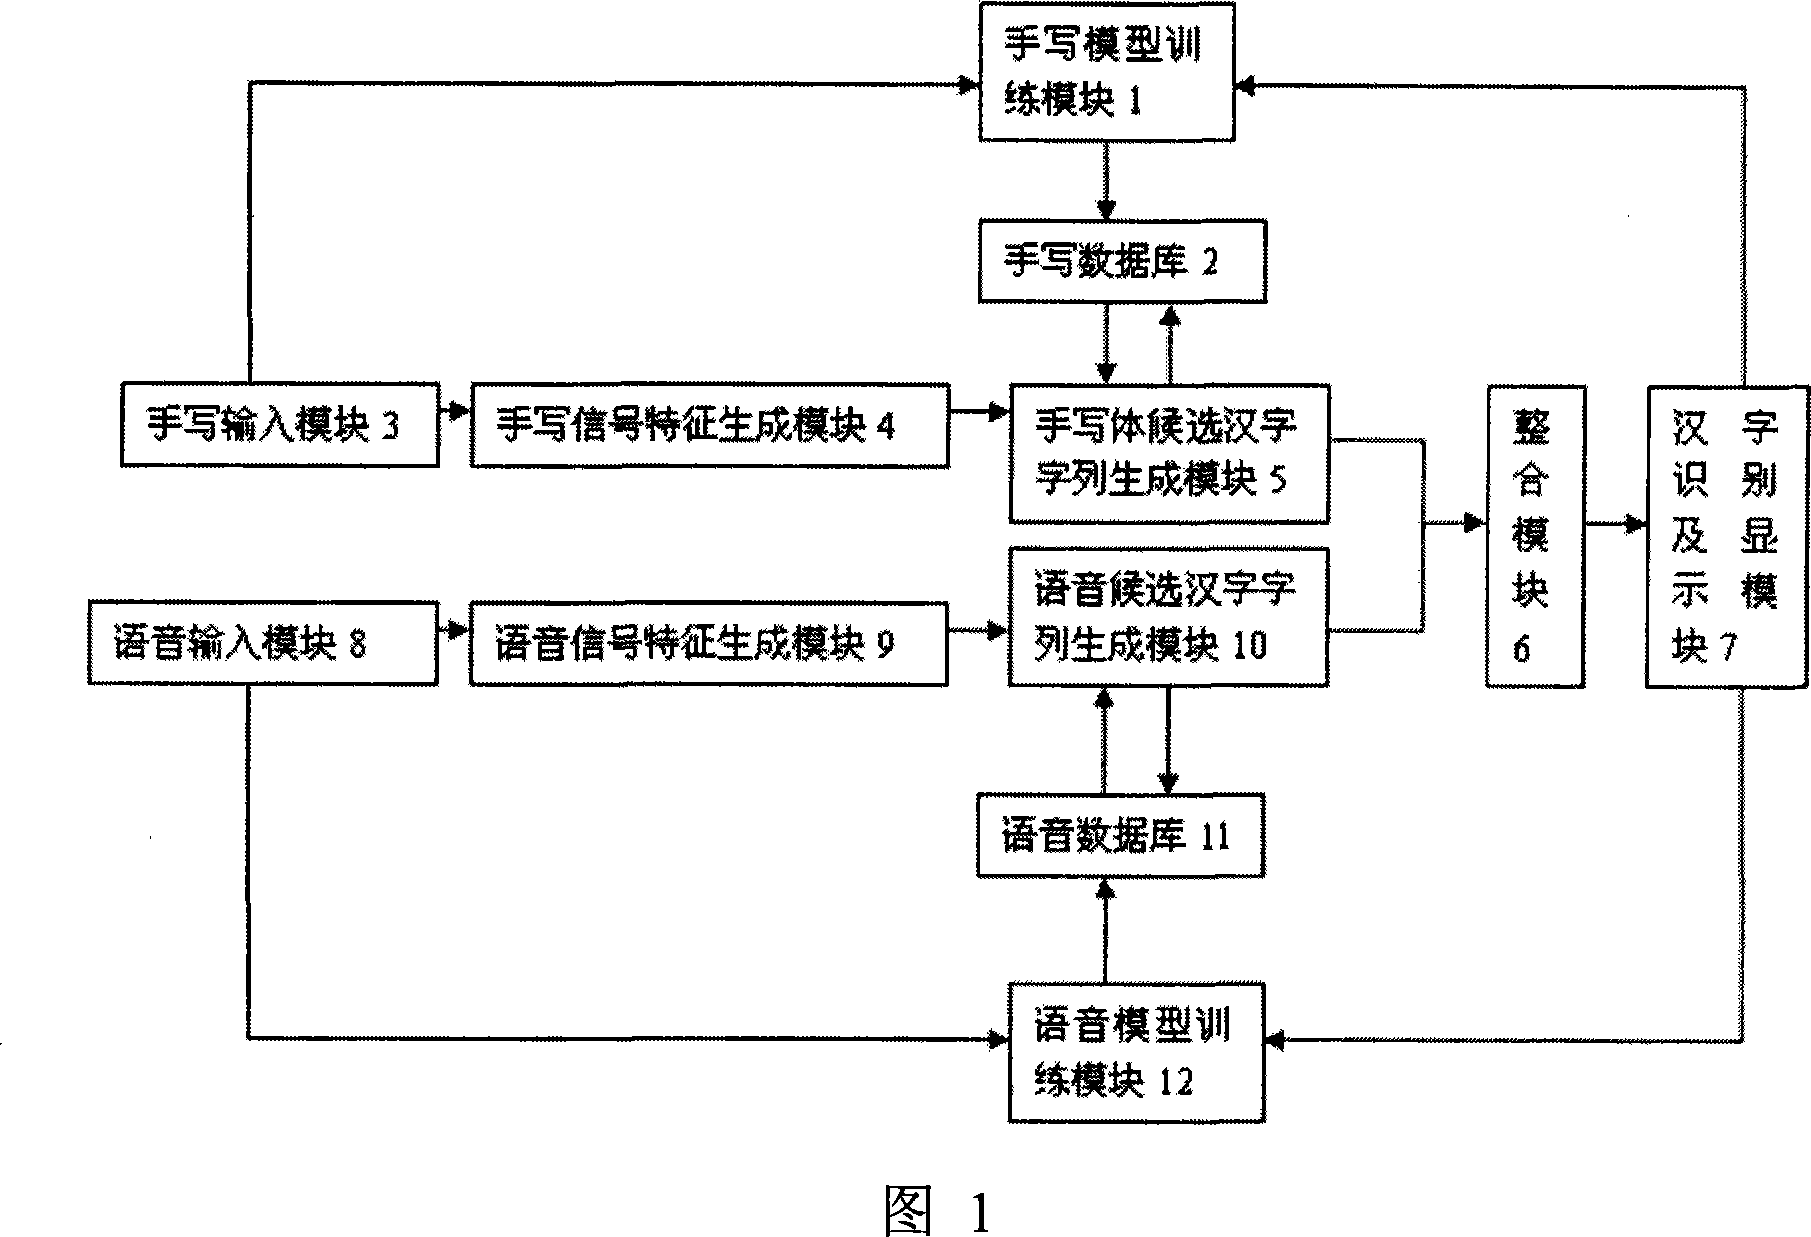 Chinese characters input system integrating voice input and hand-written input function